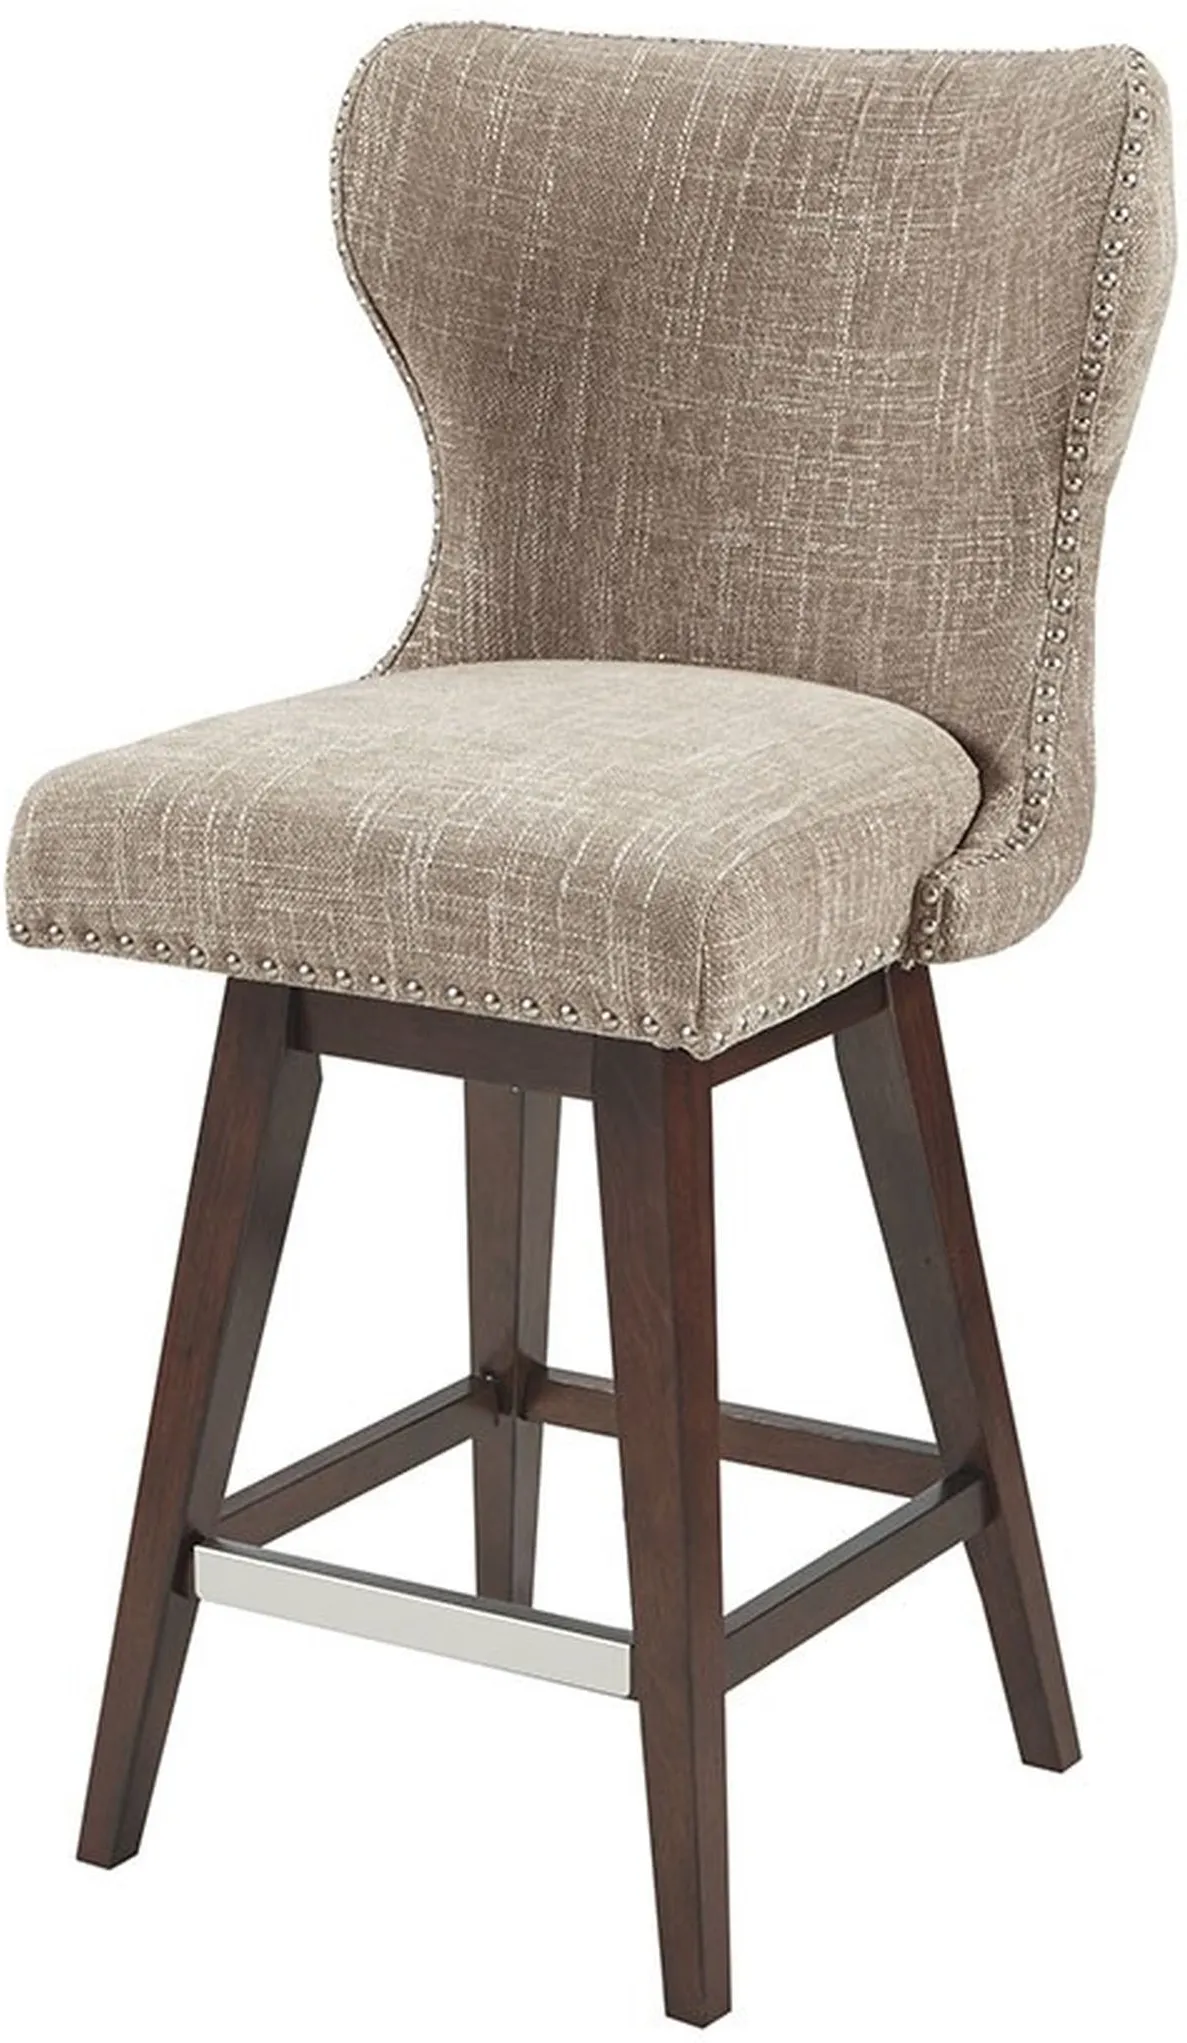 Olliix by Madison Park Camel/Brown Hancock High Wingback Button Tufted Upholstered Swivel Counter Height Stool